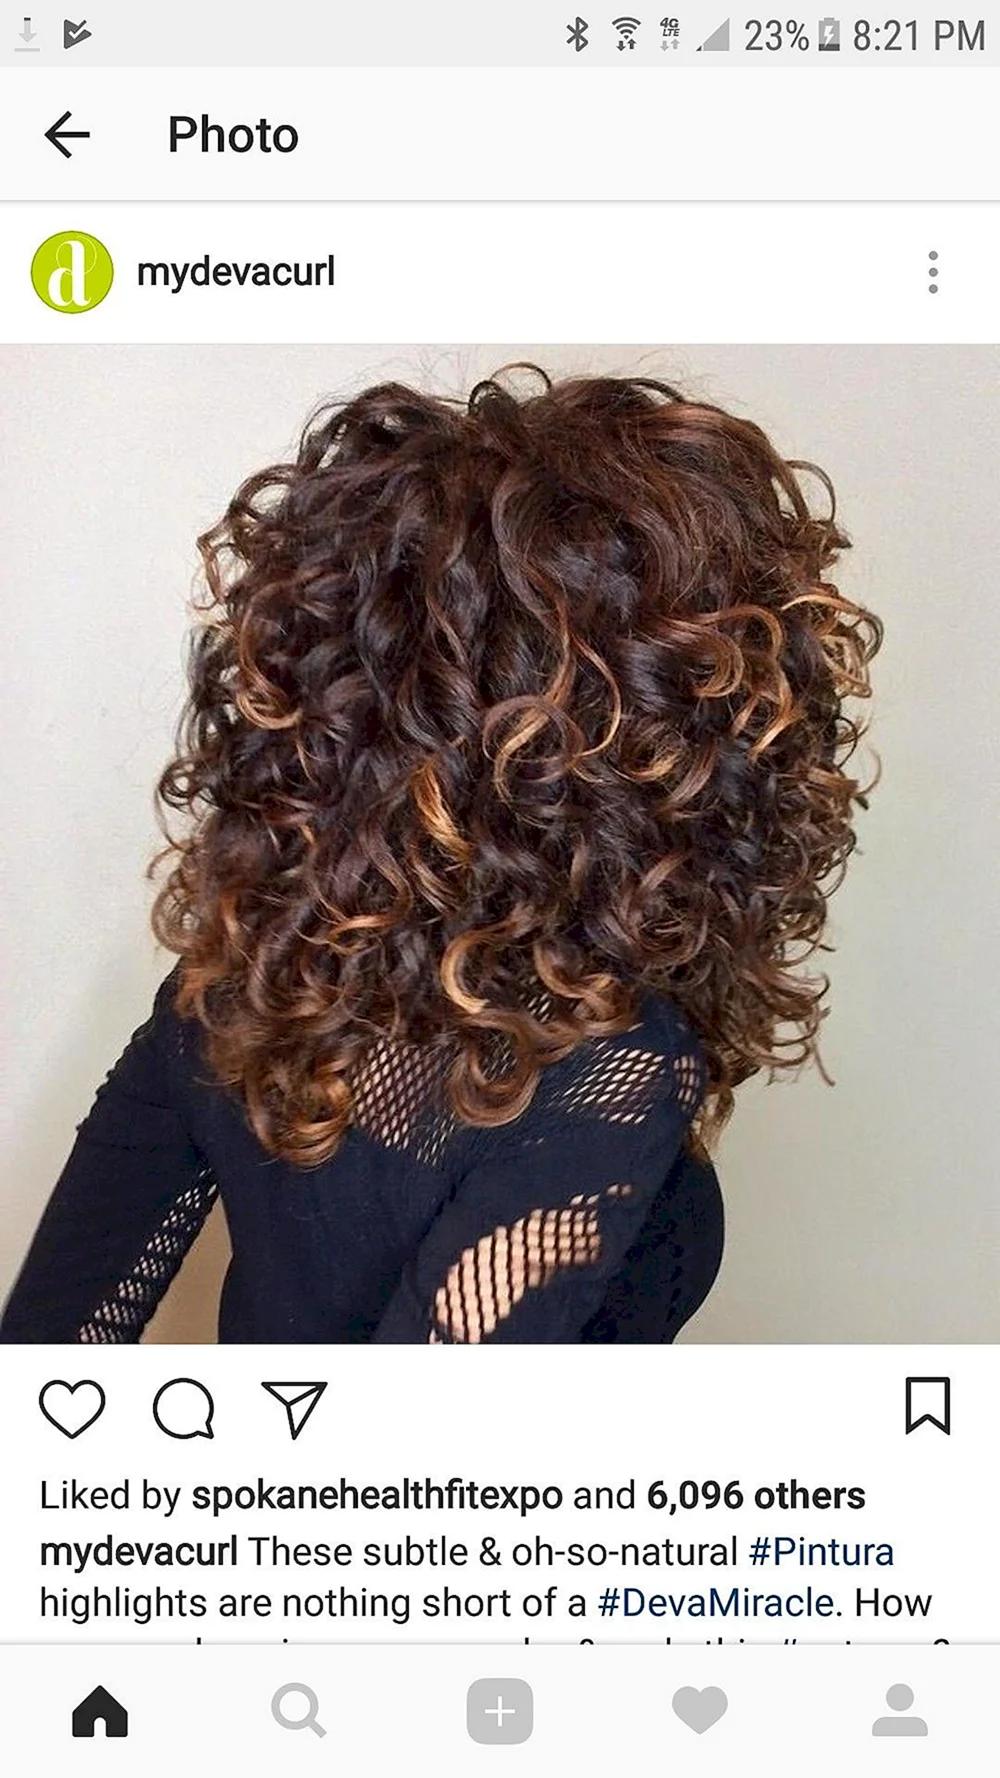 Curly hair with Plaque